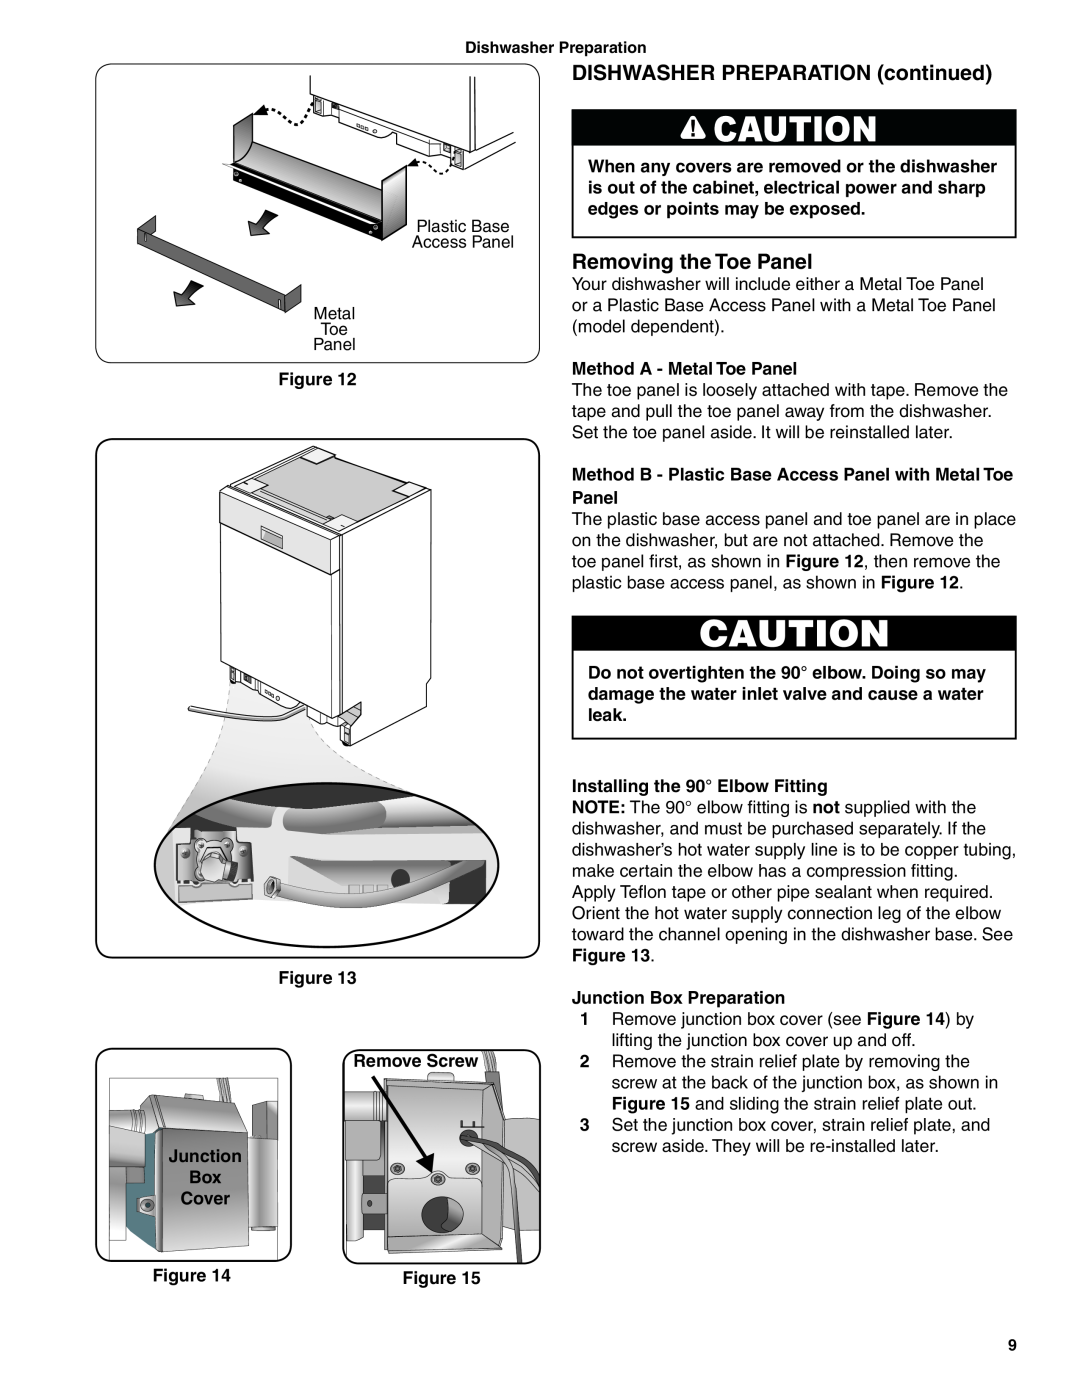 Bosch Appliances BSH Dishwasher important safety instructions DISHWASHER PREPARATION continued, Removing the Toe Panel 